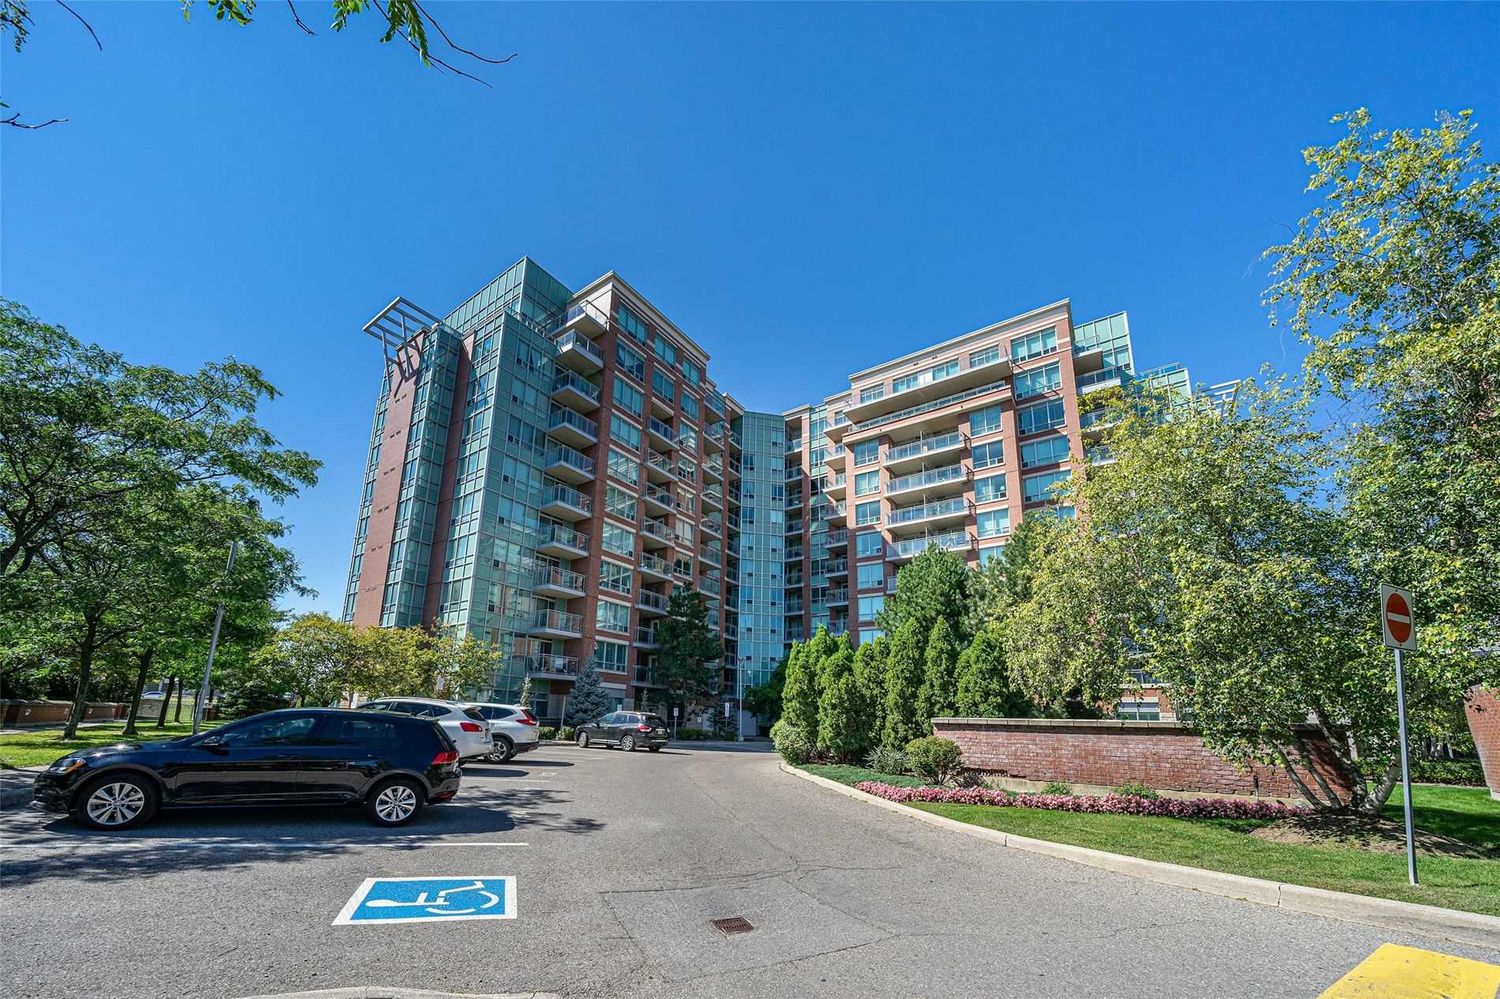 48 Suncrest Boulevard. Thornhill Towers II Condos is located in  Markham, Toronto - image #2 of 2